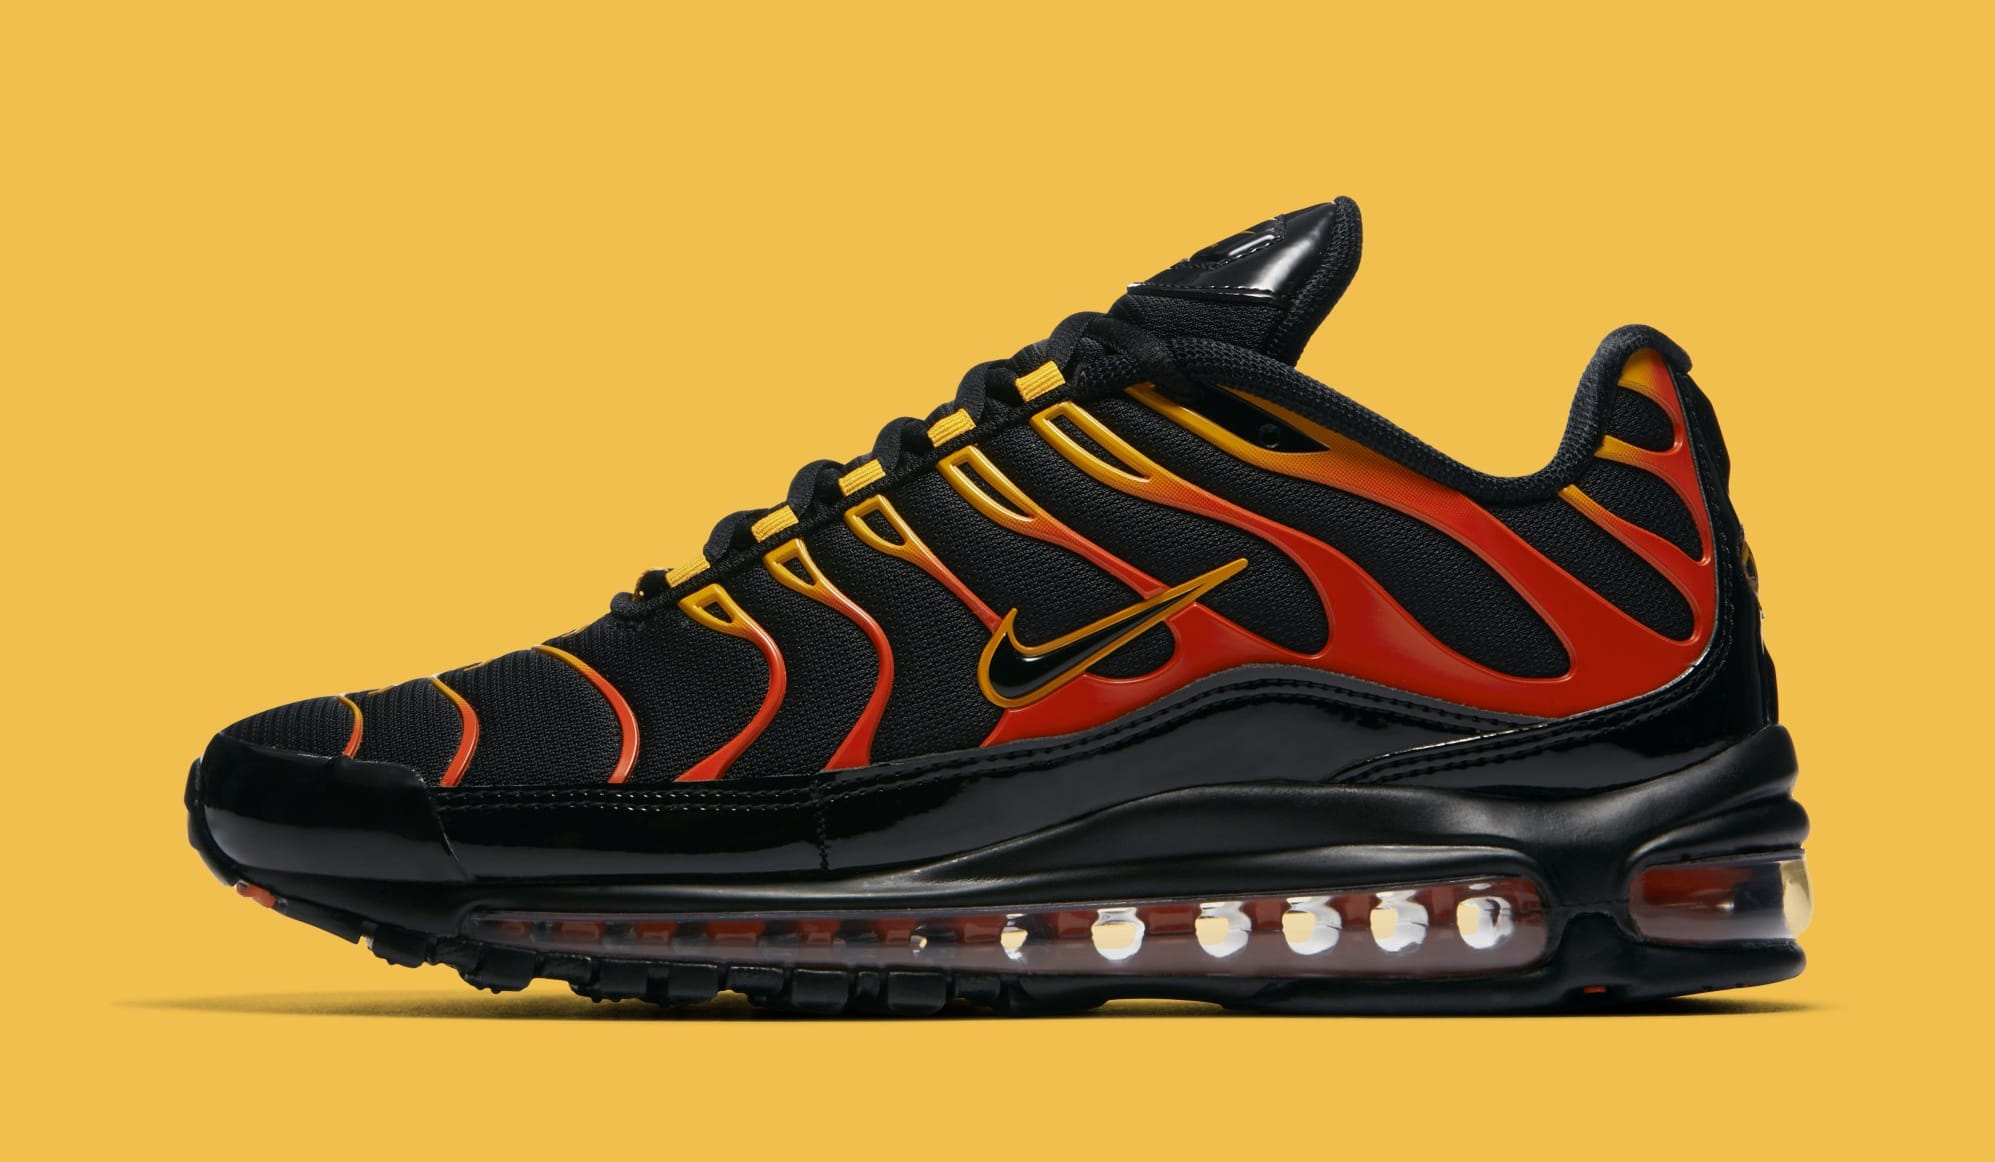 Air Max 'Black/Engine/Shock AH8144-002 Release | Sole Collector